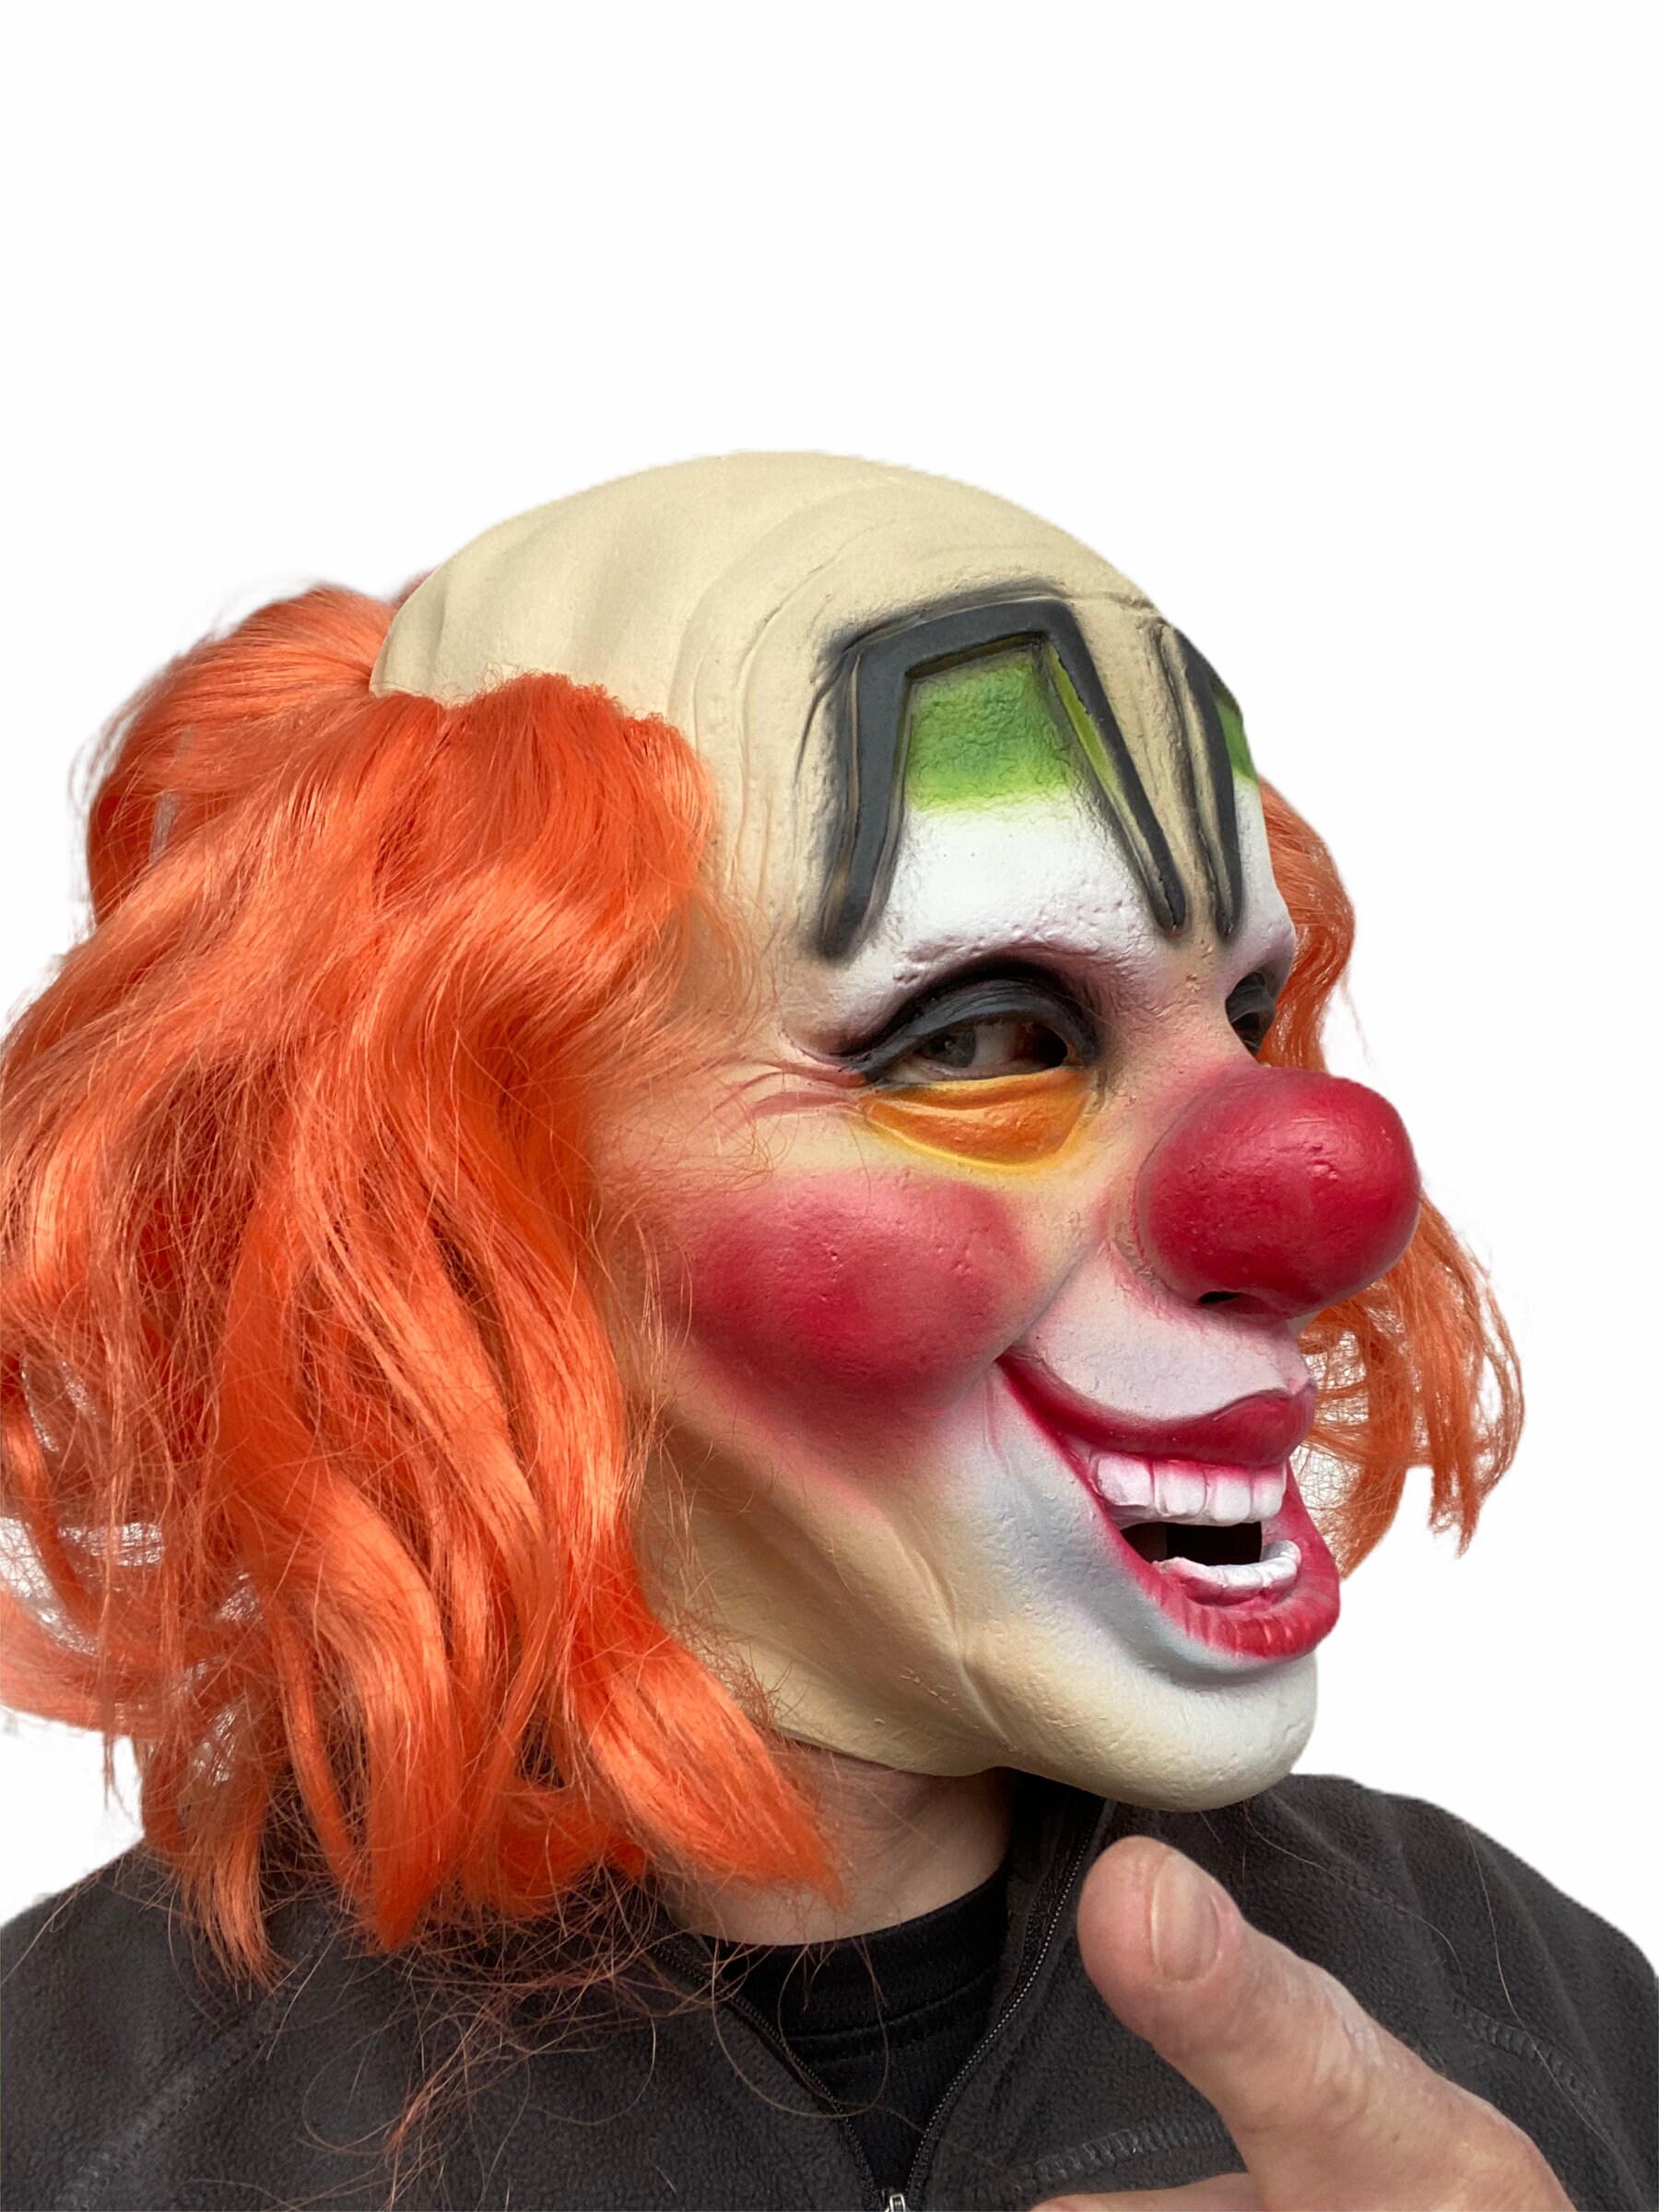 Slipknot Style Shawn Crahan Clown Mask Vintage Style Classic | Etsy